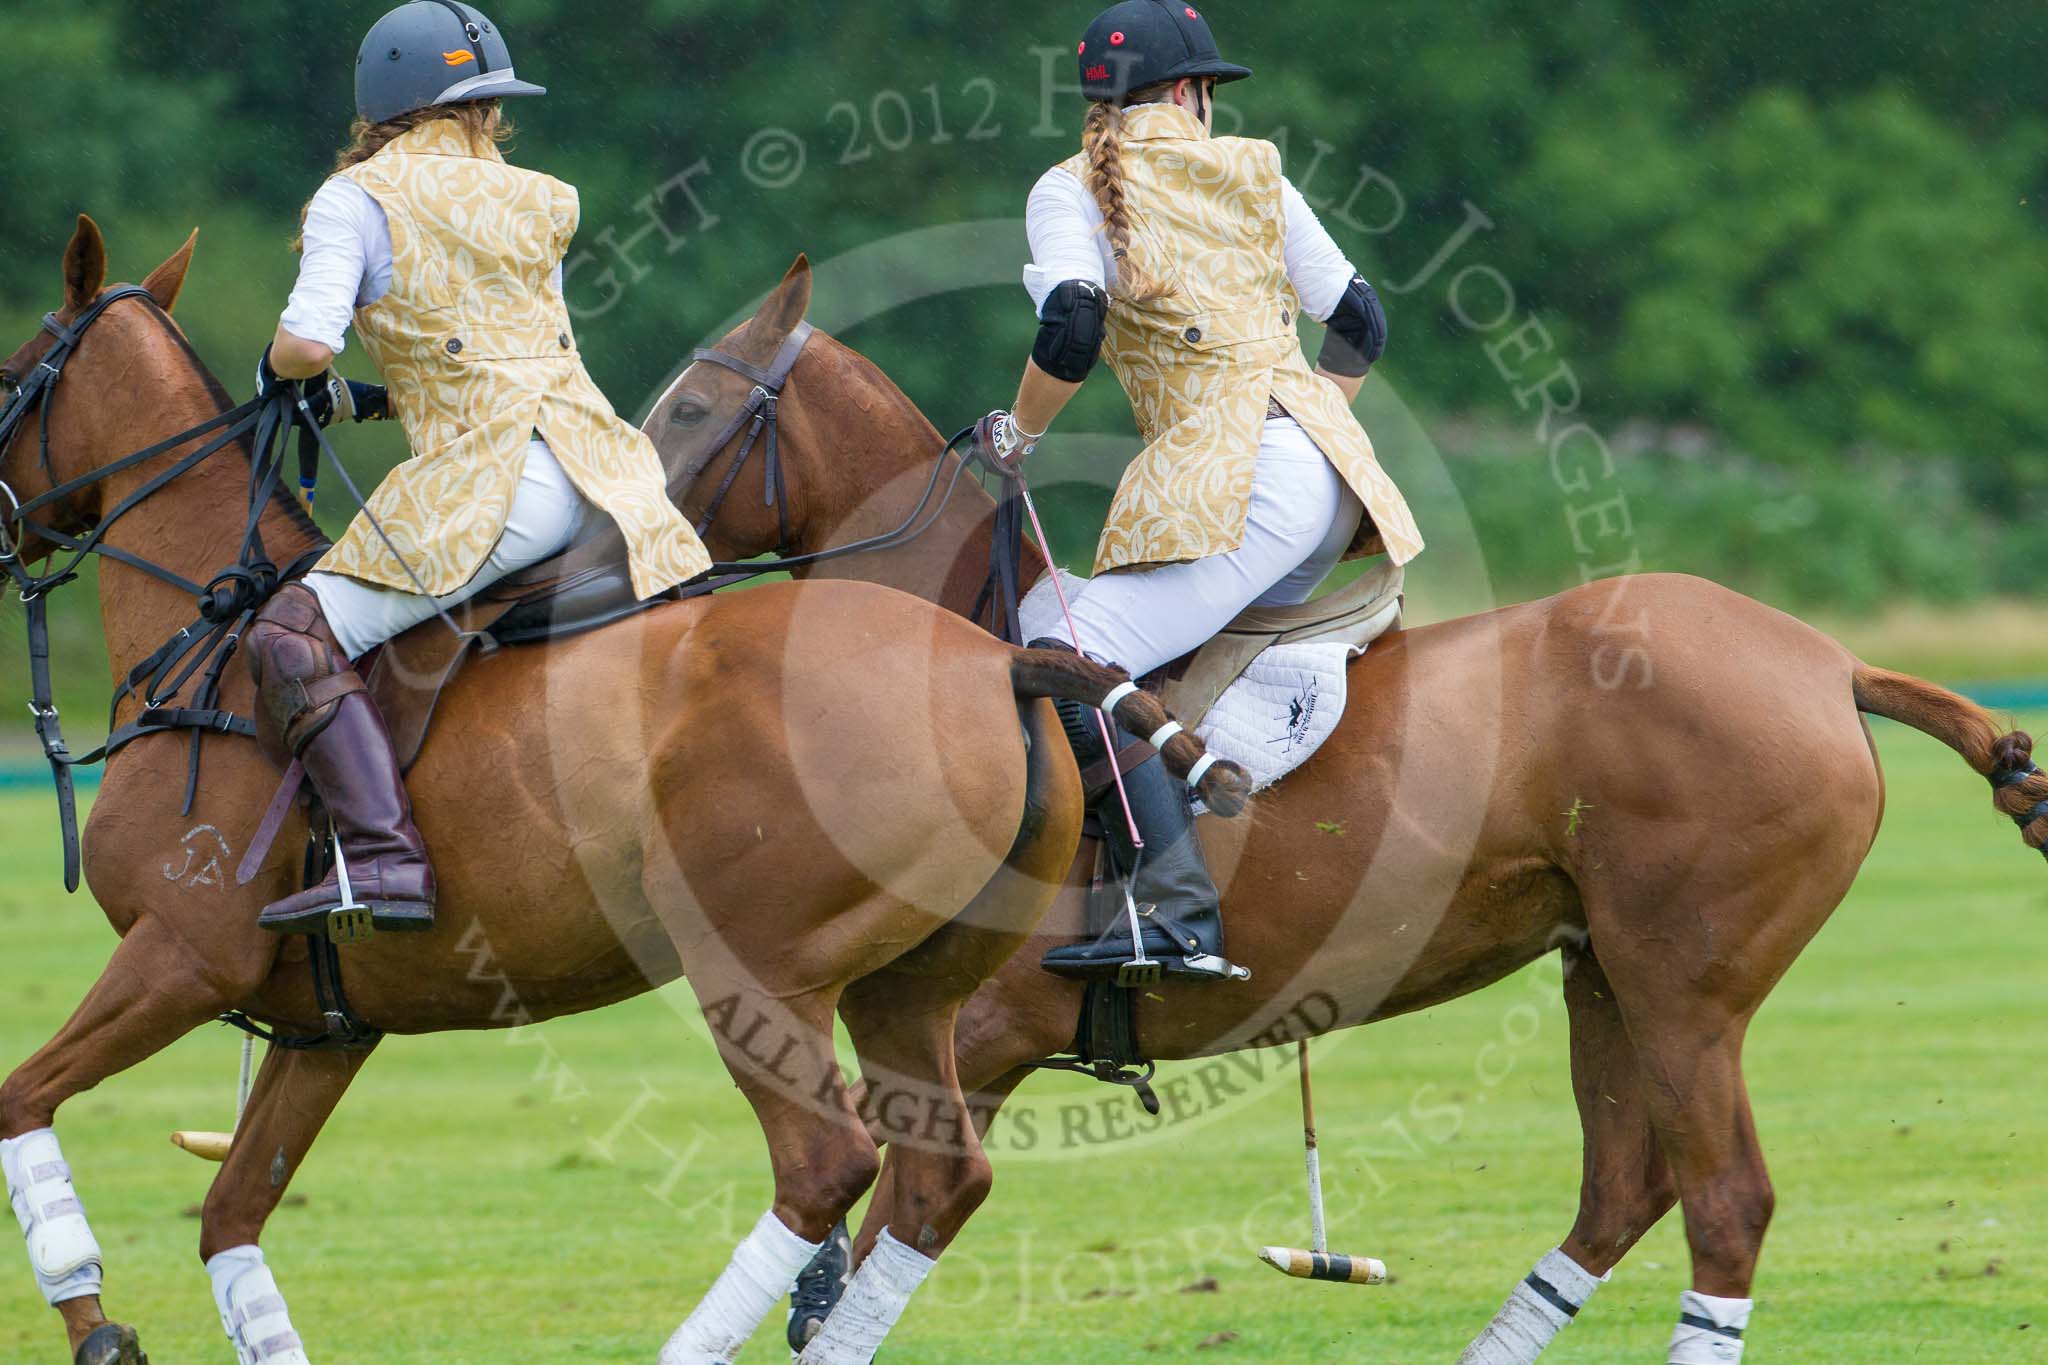 7th Heritage Polo Cup semi-finals: The Amazons of Polo sponsored by Polistas - Emma Boers and Heloise Lorentzen..
Hurtwood Park Polo Club,
Ewhurst Green,
Surrey,
United Kingdom,
on 04 August 2012 at 13:29, image #140